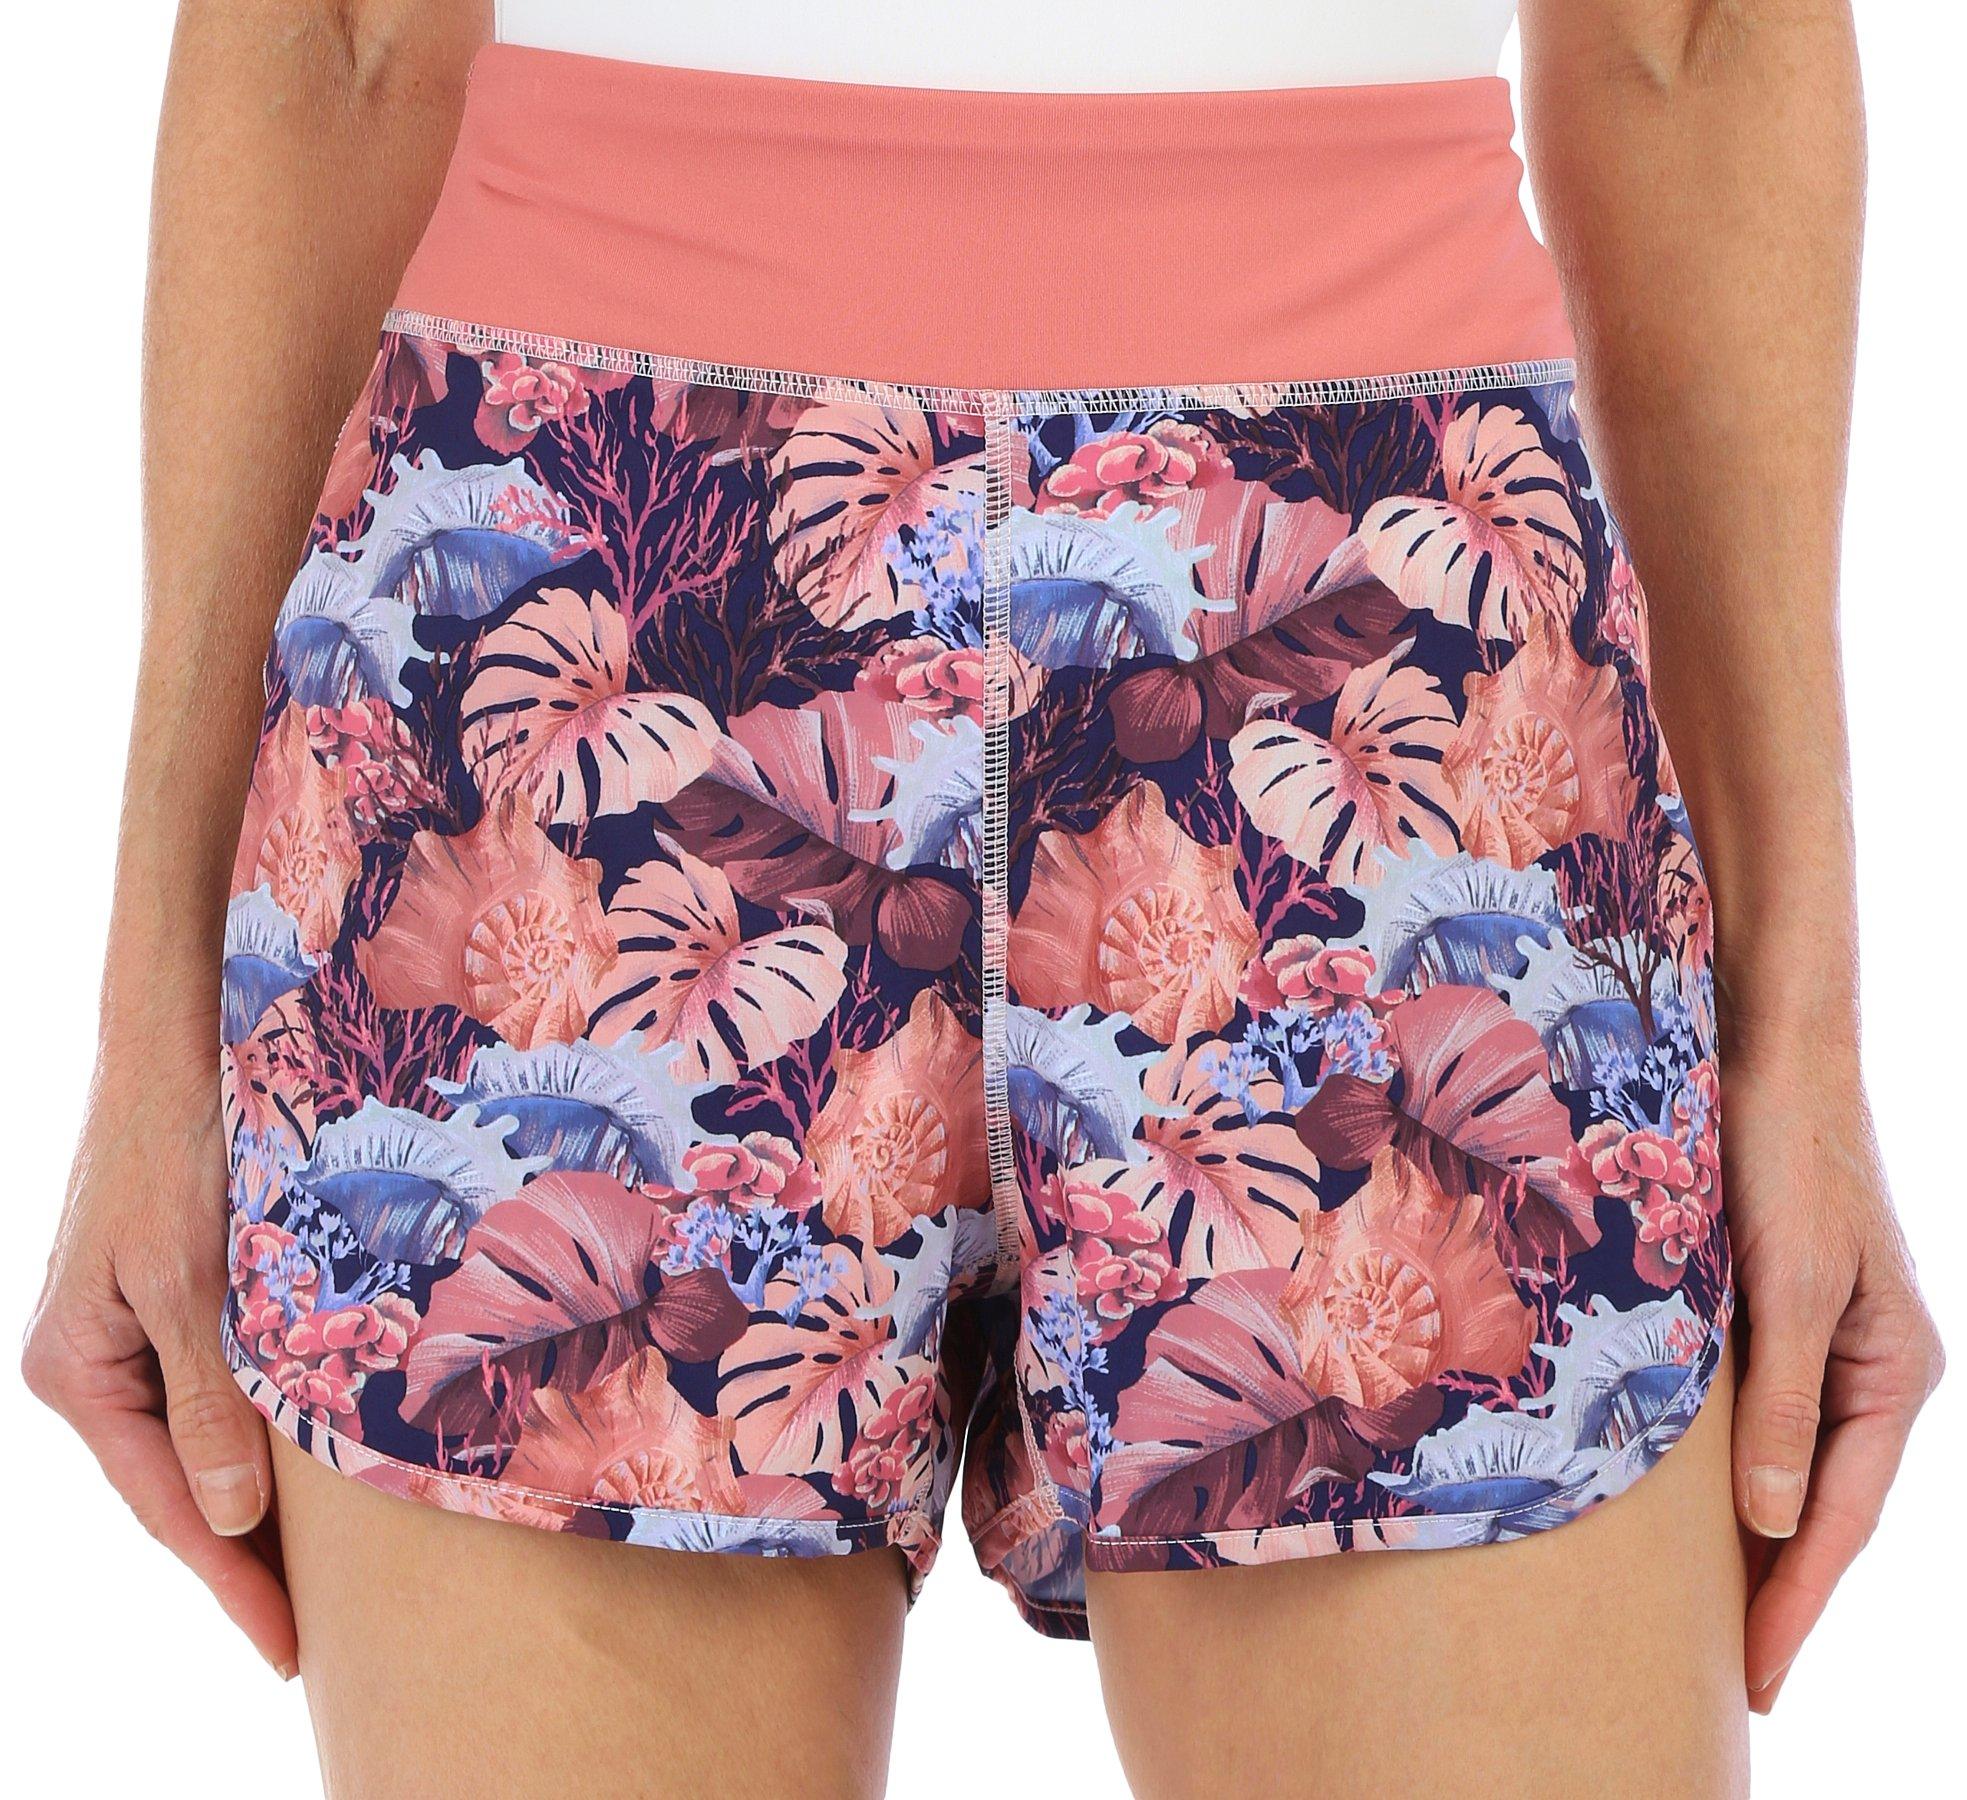 https://images.beallsflorida.com/i/beallsflorida/599-2393-5021-69-yyy/*Womens-3in.-Beach-Find-Offshore-Shorts*?$product$&fmt=auto&qlt=default